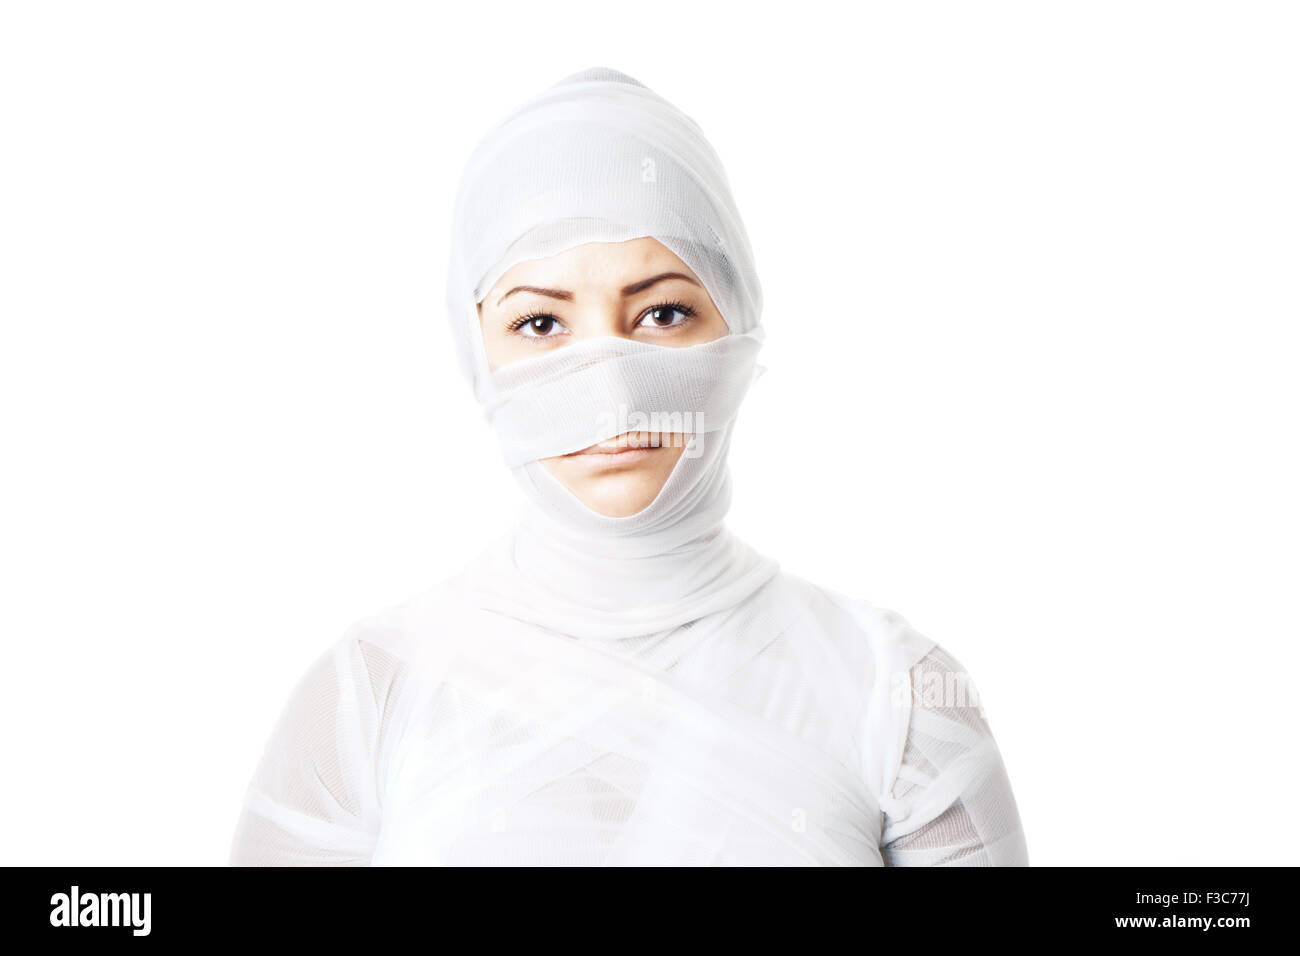 female patient wrapped in bandages Stock Photo